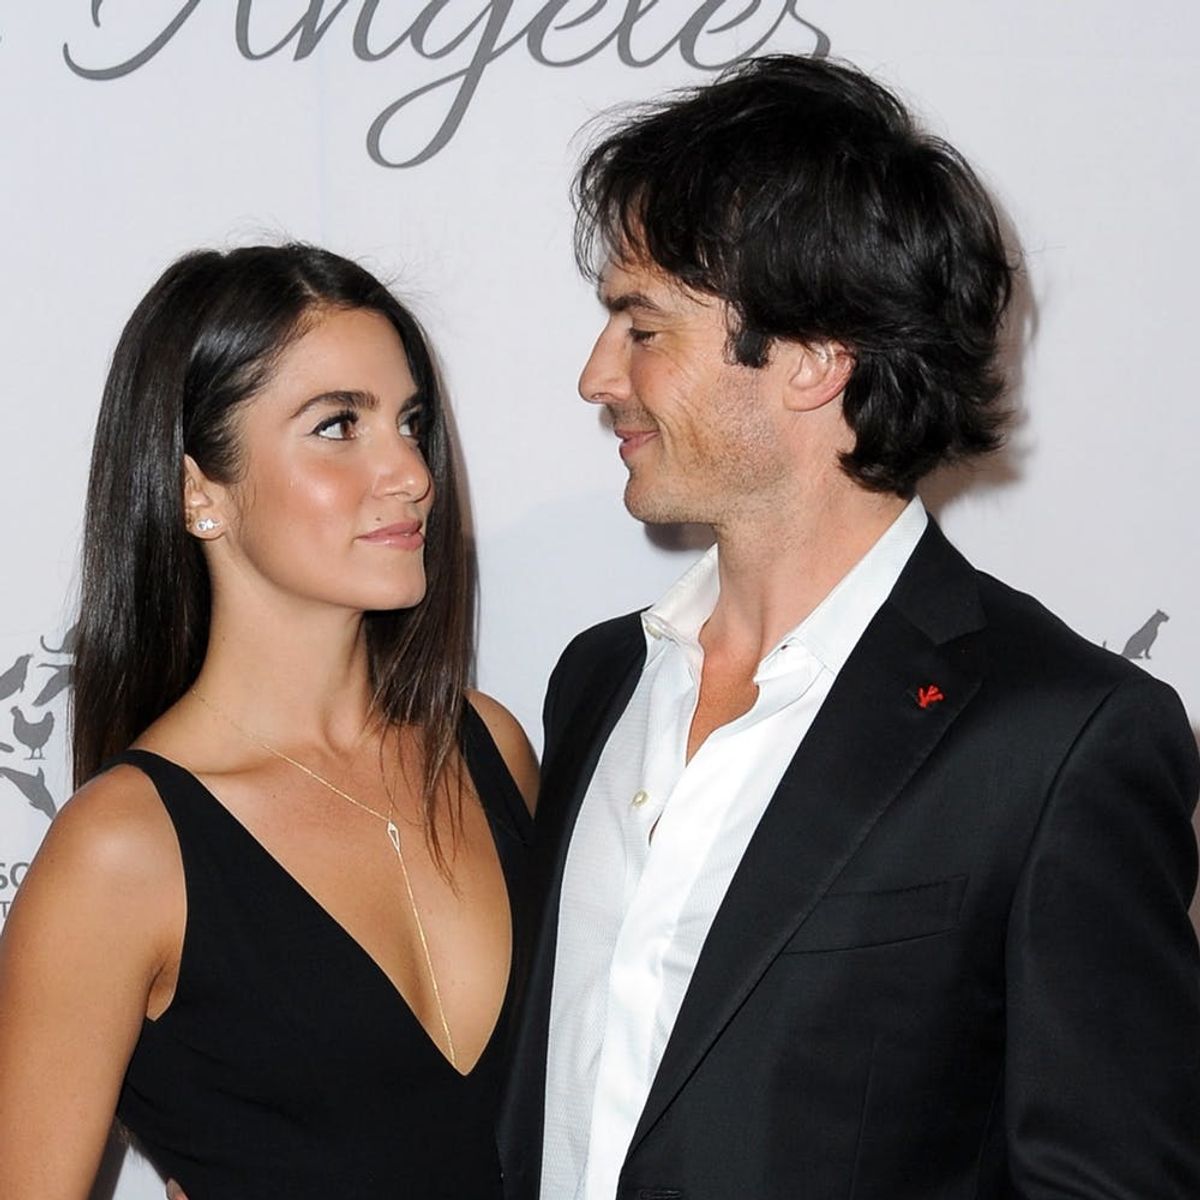 Nikki Reed and Ian Somerhalder Welcome Baby Girl Bodhi Soleil, According to Reports